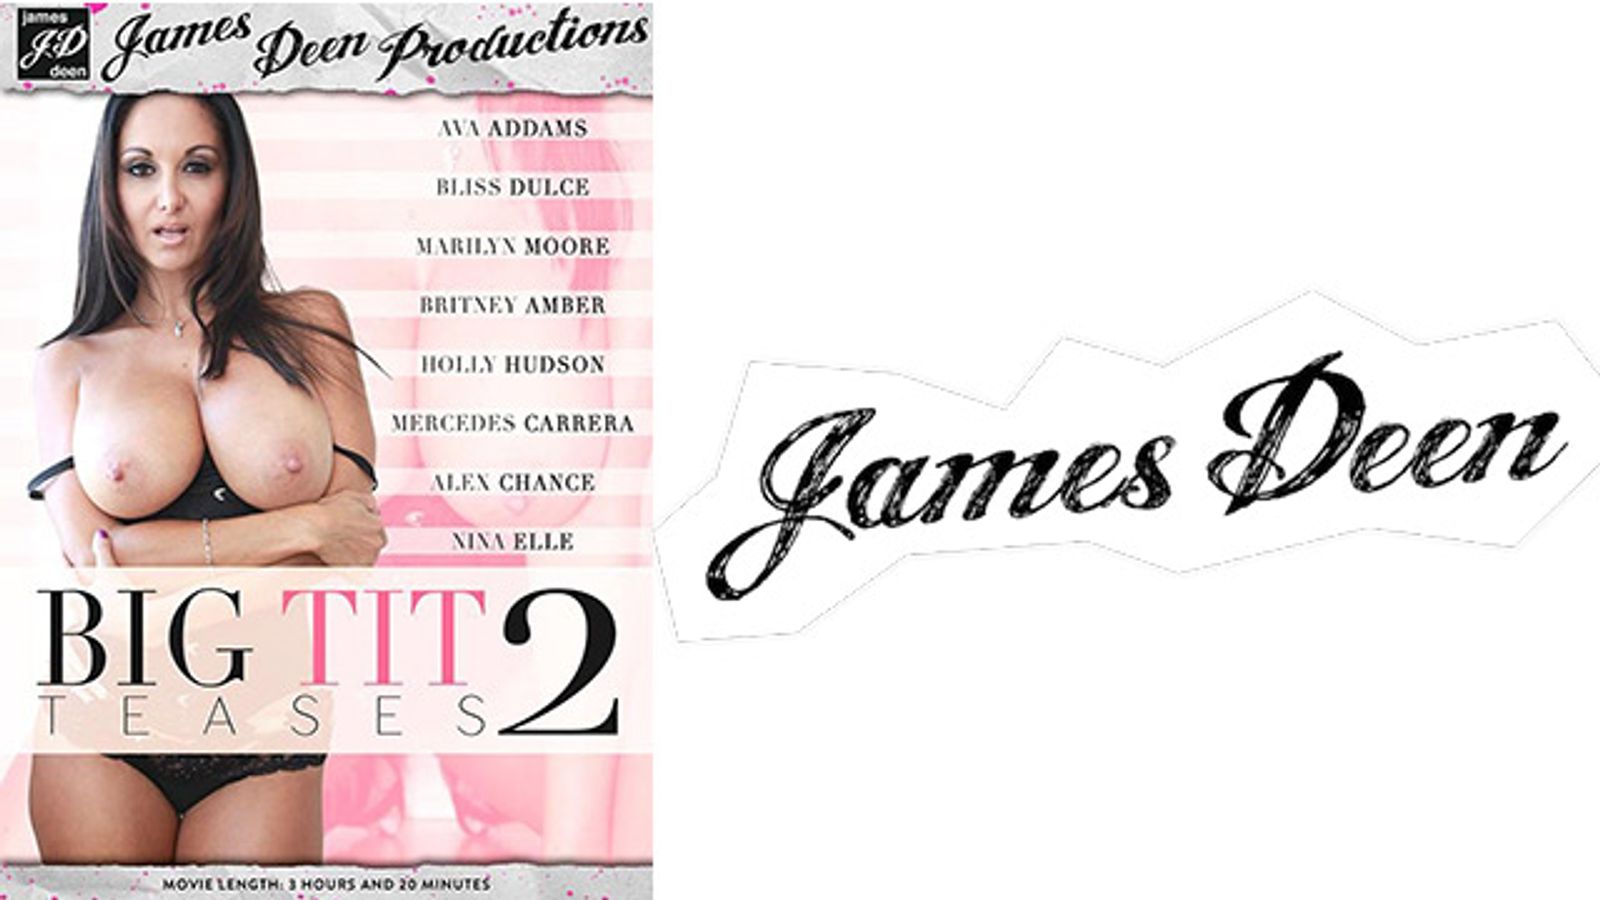 ‘Big Tit Teases 2' Available Now From James Deen Productions